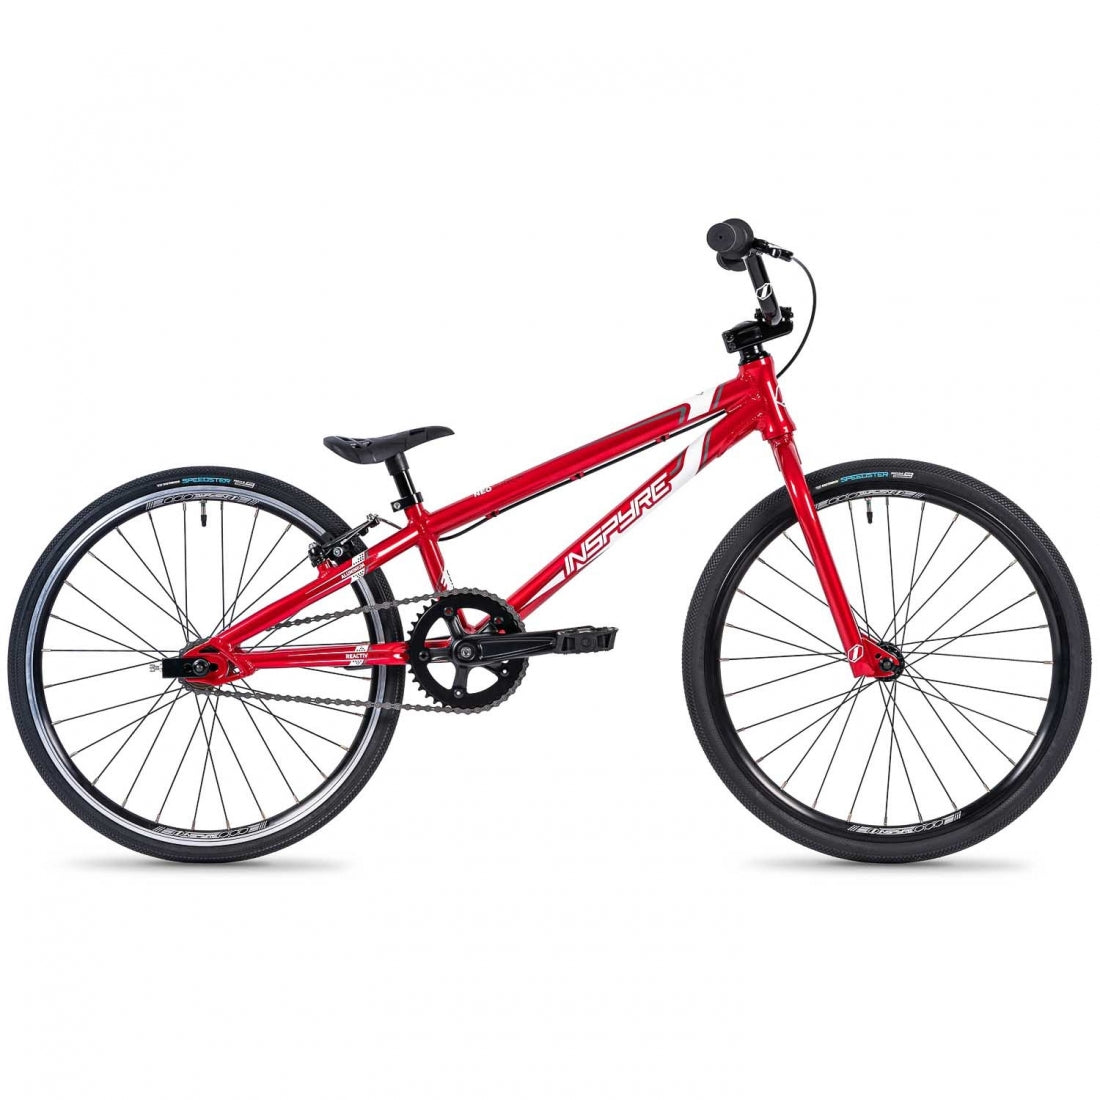 Red Inspyre Neo Expert BMX bike against a white background.